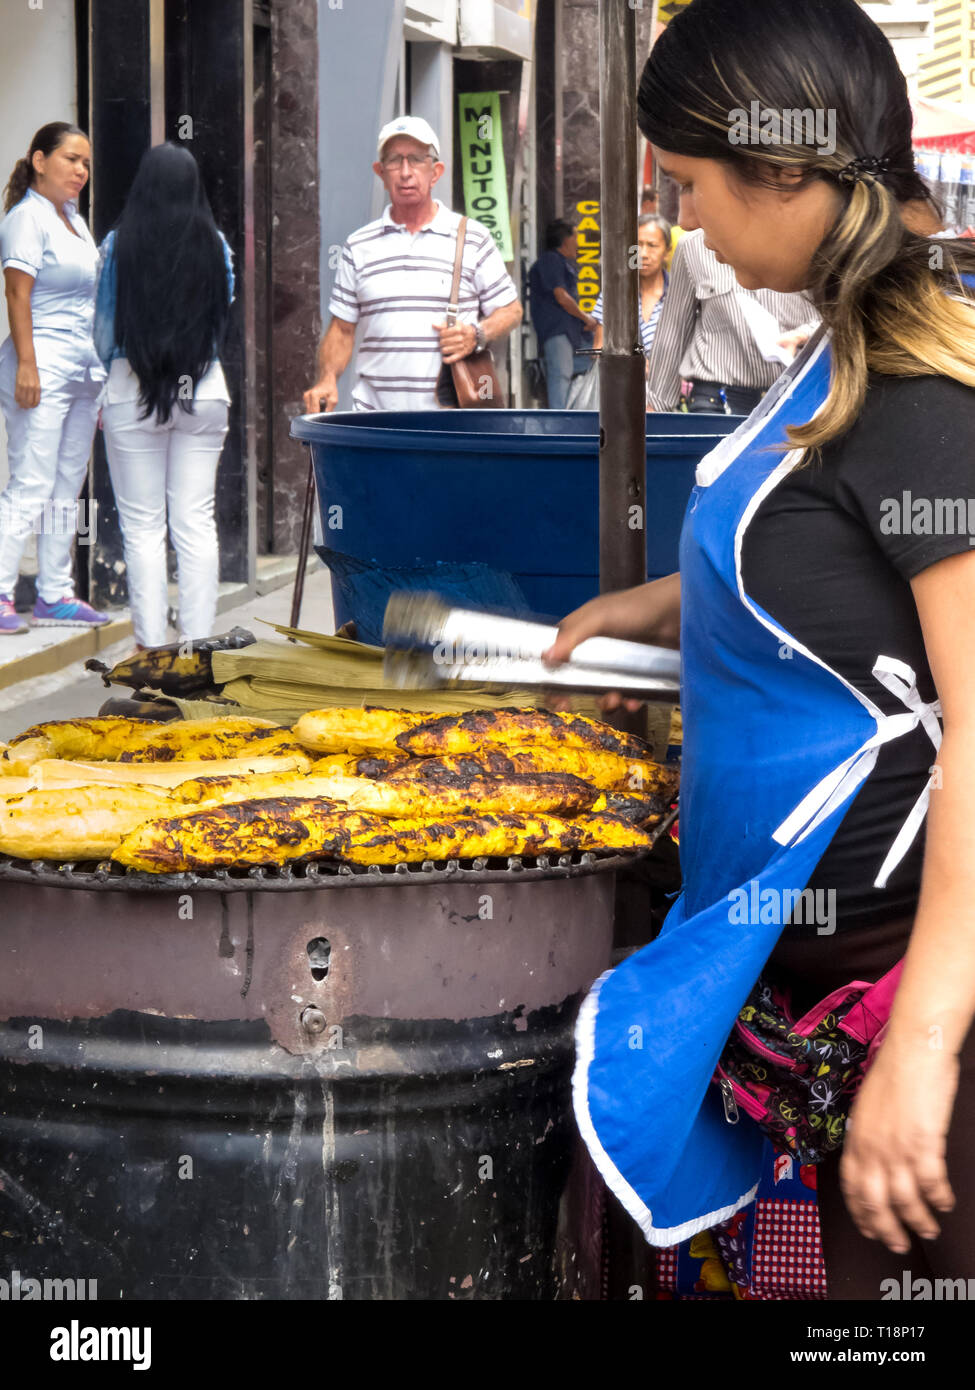 CALI, COLOMBIA - FEBRUARY, 2019: Women cooking and selling roasted ripe plantain at Cali city center Stock Photo